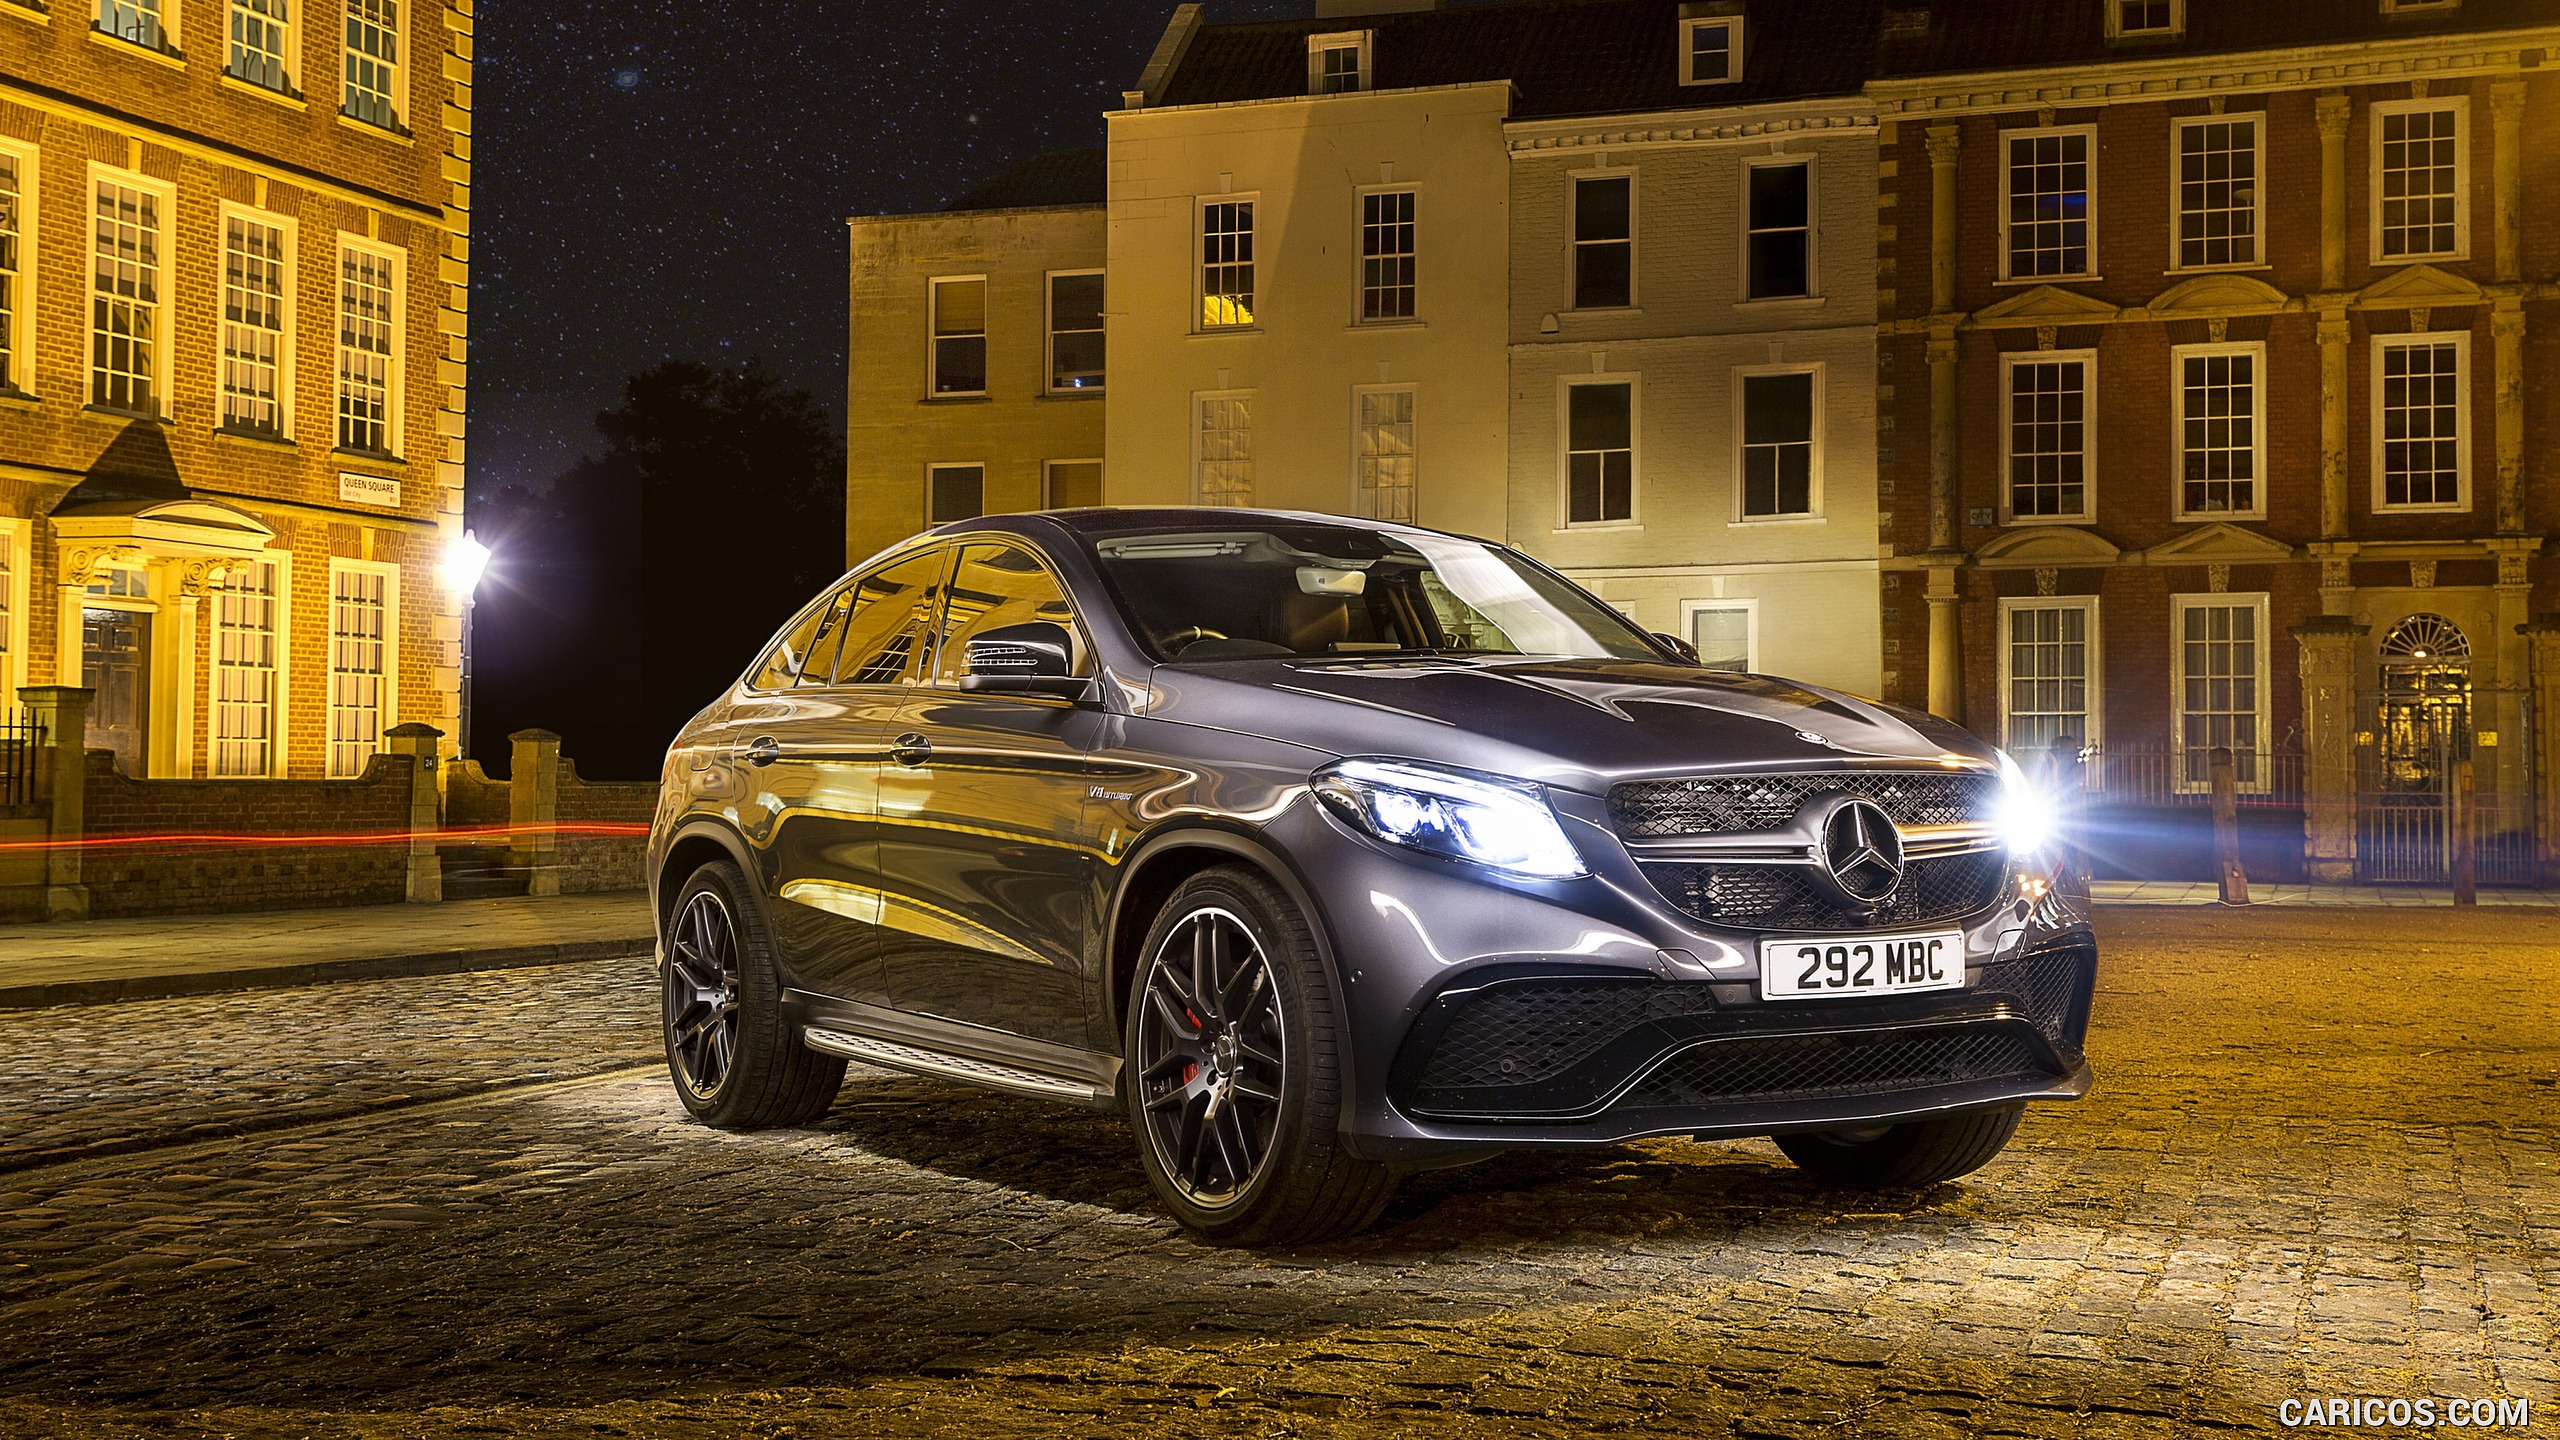 2016 Mercedes-AMG GLE 63 S Coupe (UK-Spec) - Front, #51 of 65